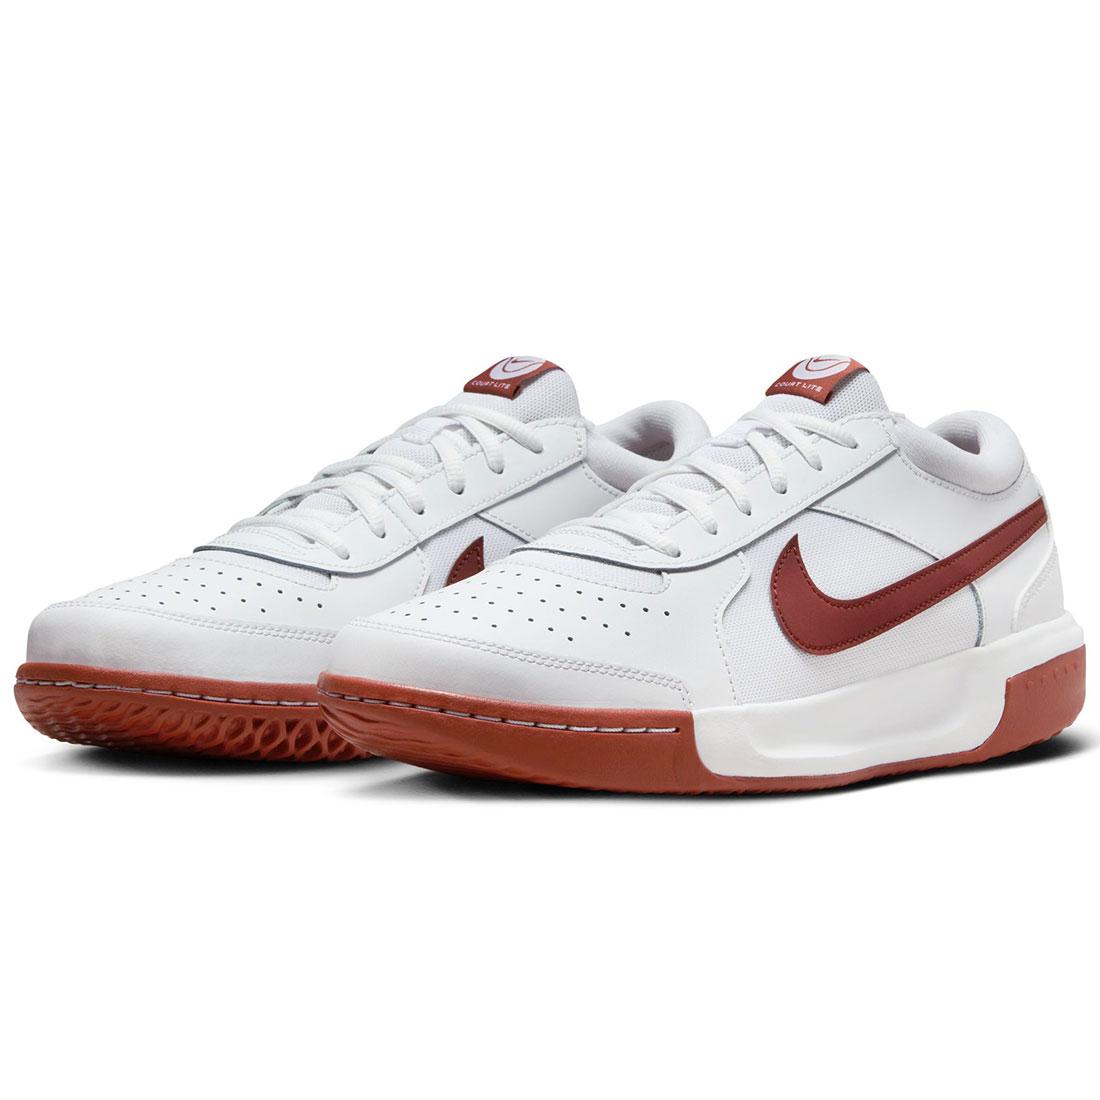 NikeCourt Men`s Air Zoom Lite 3 Tennis Shoes White and Team Red